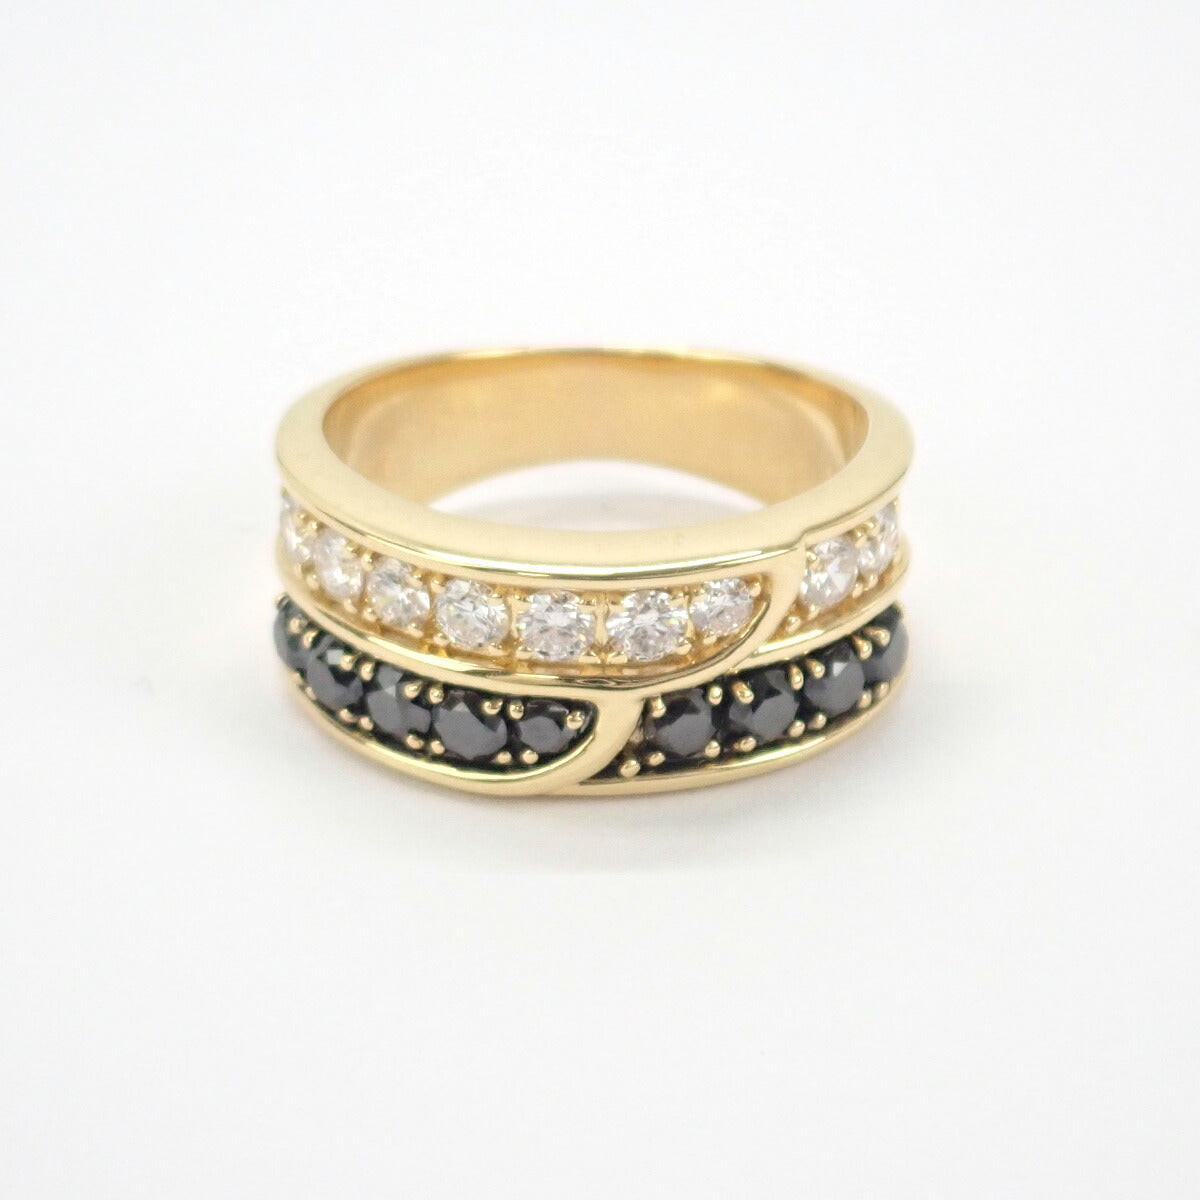 [LuxUness]  K18YG Diamond Ring with Black Diamond 0.49ct & Diamond 0.71ct, Size 11, Yellow Gold, Ladies (Pre-owned) in Excellent condition